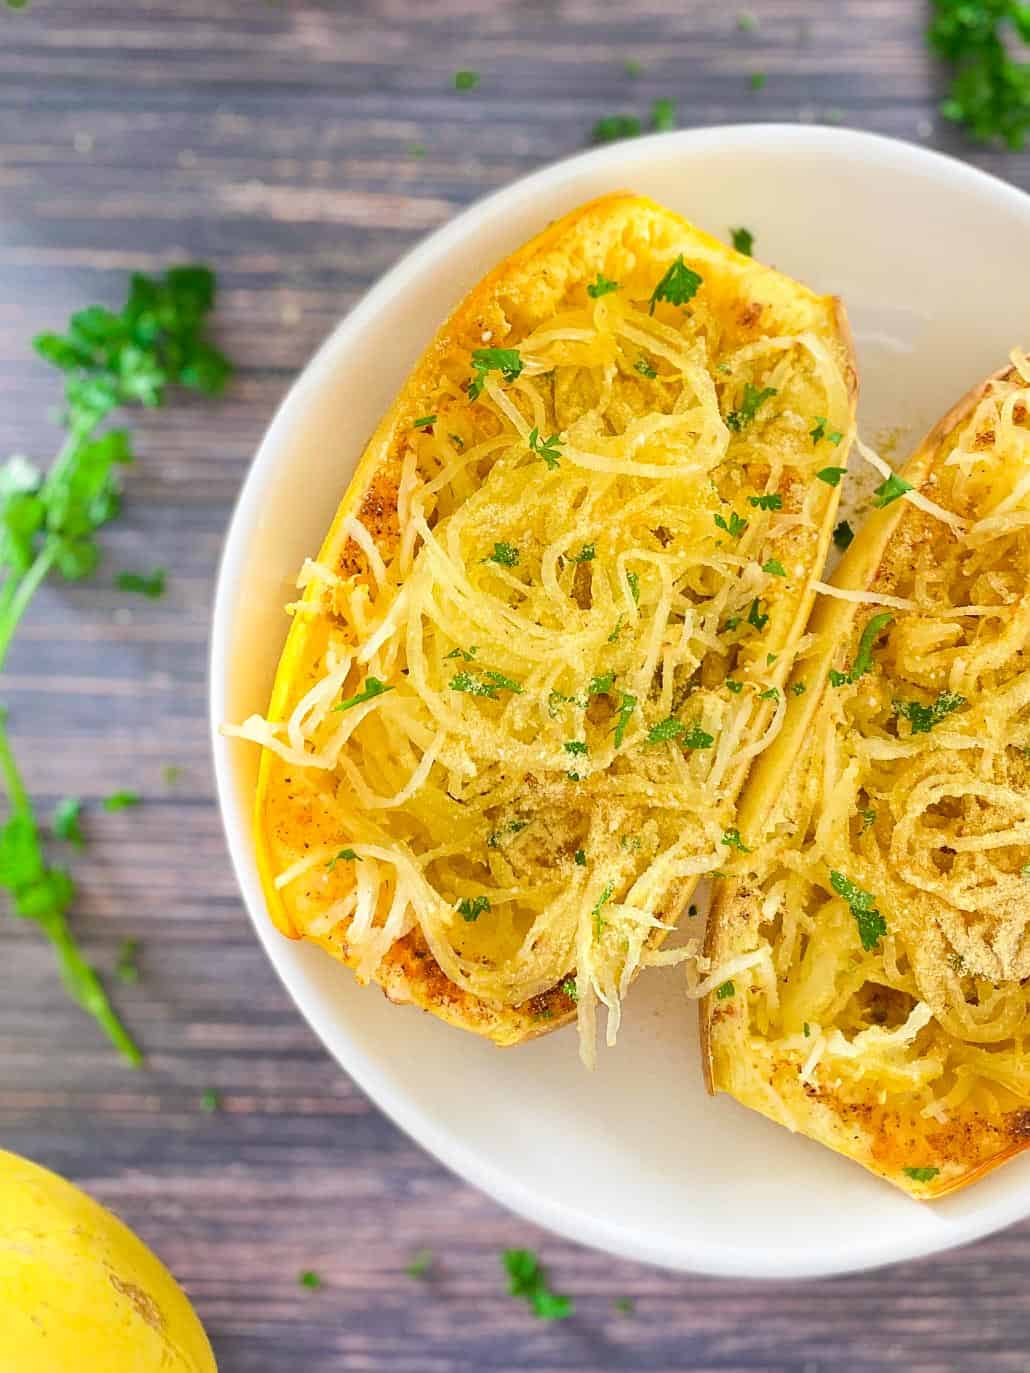 Spaghetti squash cut in half with noodles fluffed up and parsley garnish.